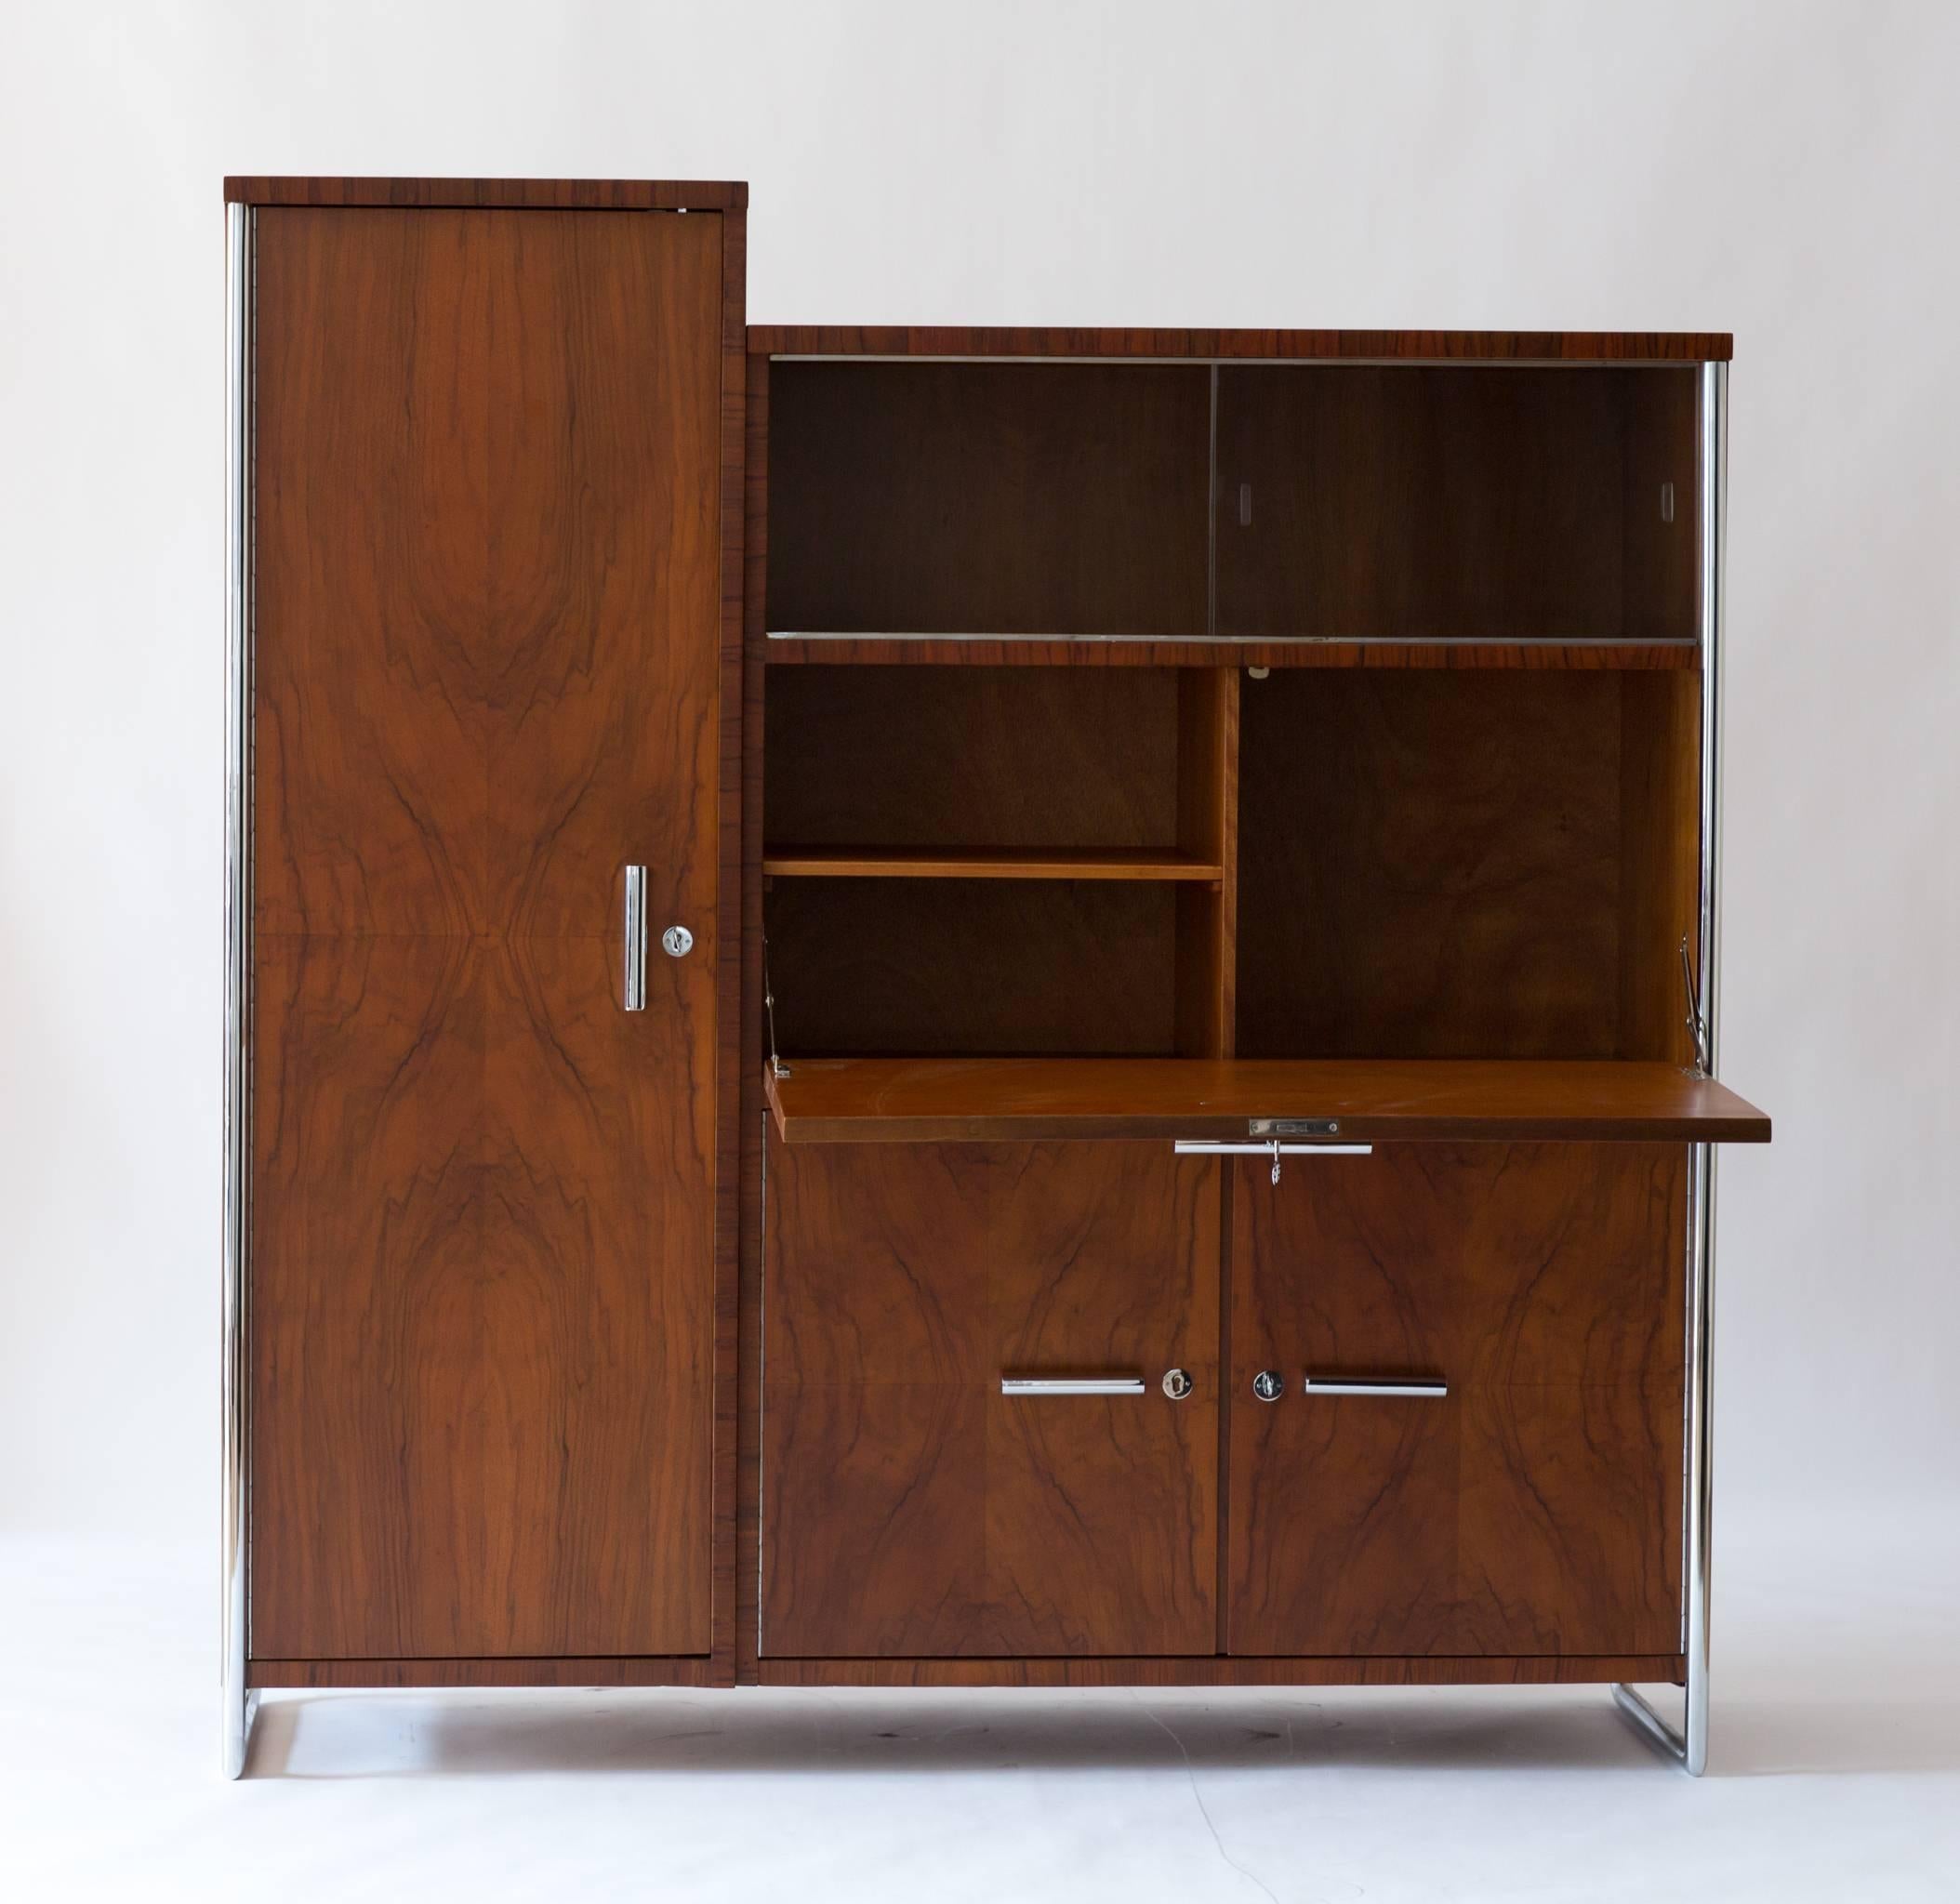 A beautifully midcentury polished walnut Bauhaus cabinet from the 1930s and produced by Mücke & Melder.
This well-crafted cabinet is based on the work of designer H.J Hagemann and was manufactured by Mücke & Melder in the Czech Republik in the year